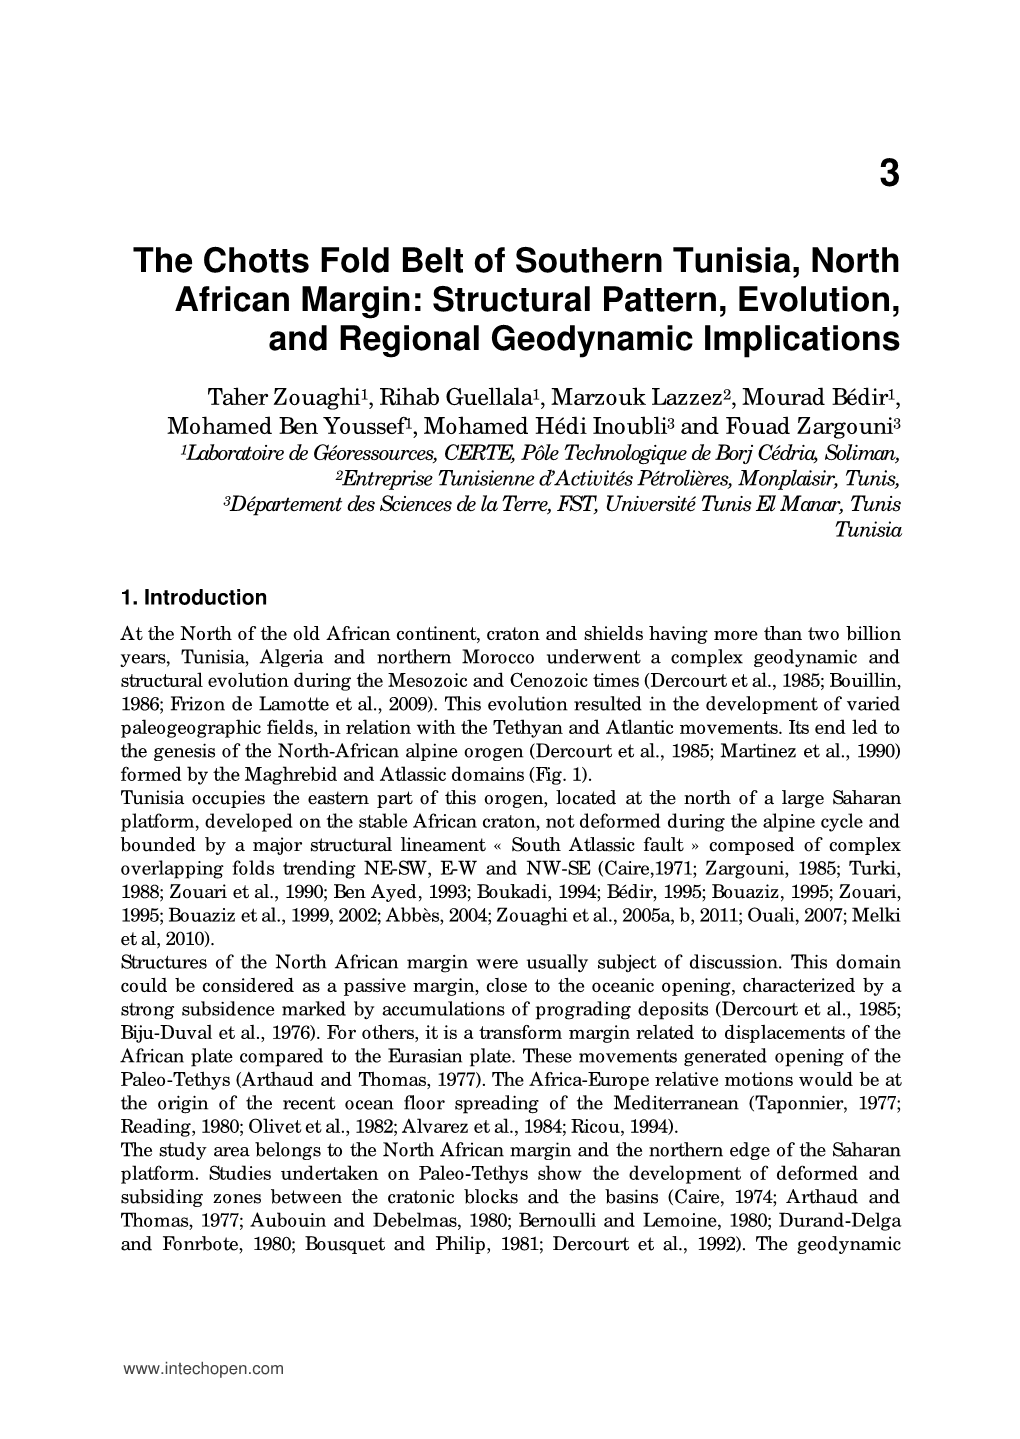 The Chotts Fold Belt of Southern Tunisia, North African Margin: Structural Pattern, Evolution, and Regional Geodynamic Implications